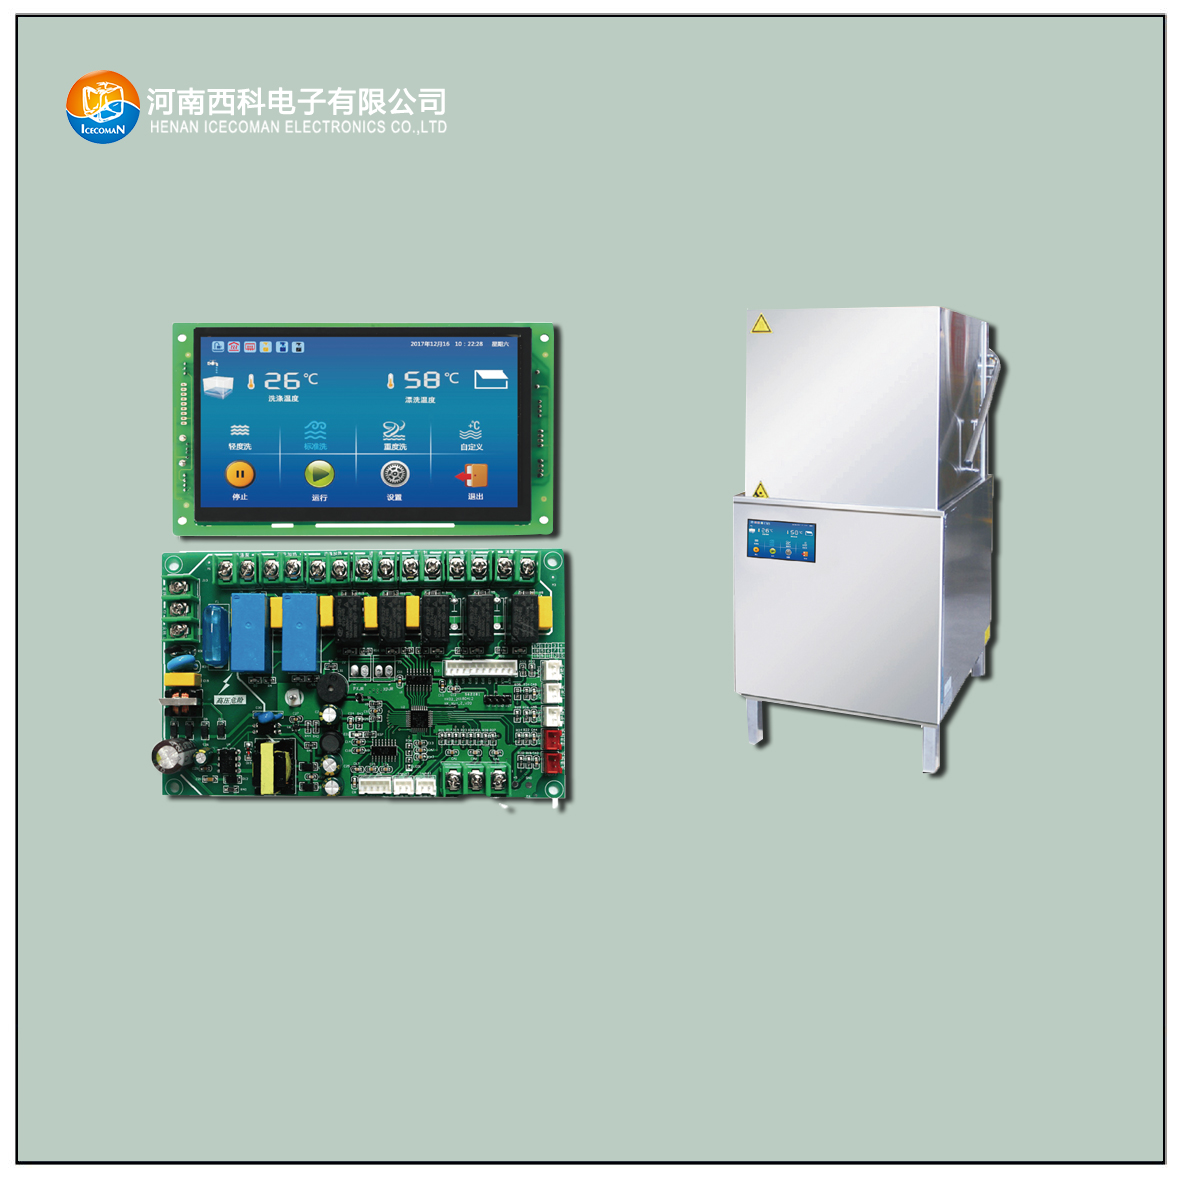 XWJ-ZG-TFT cover type dishwasher controller